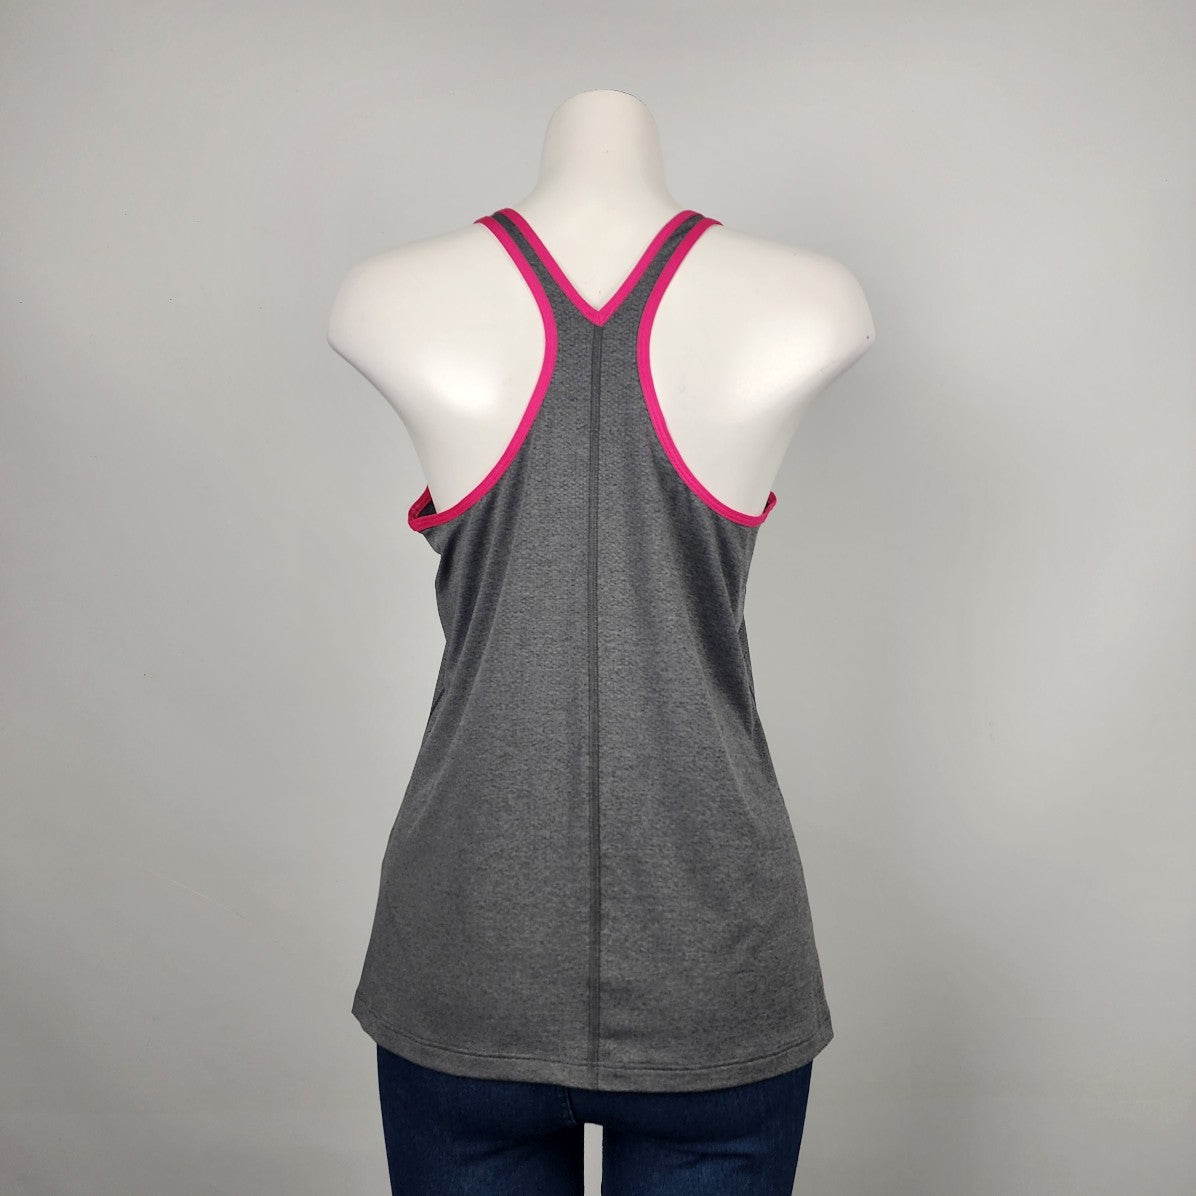 Under Armour Grey & Pink Activewear Top Size L